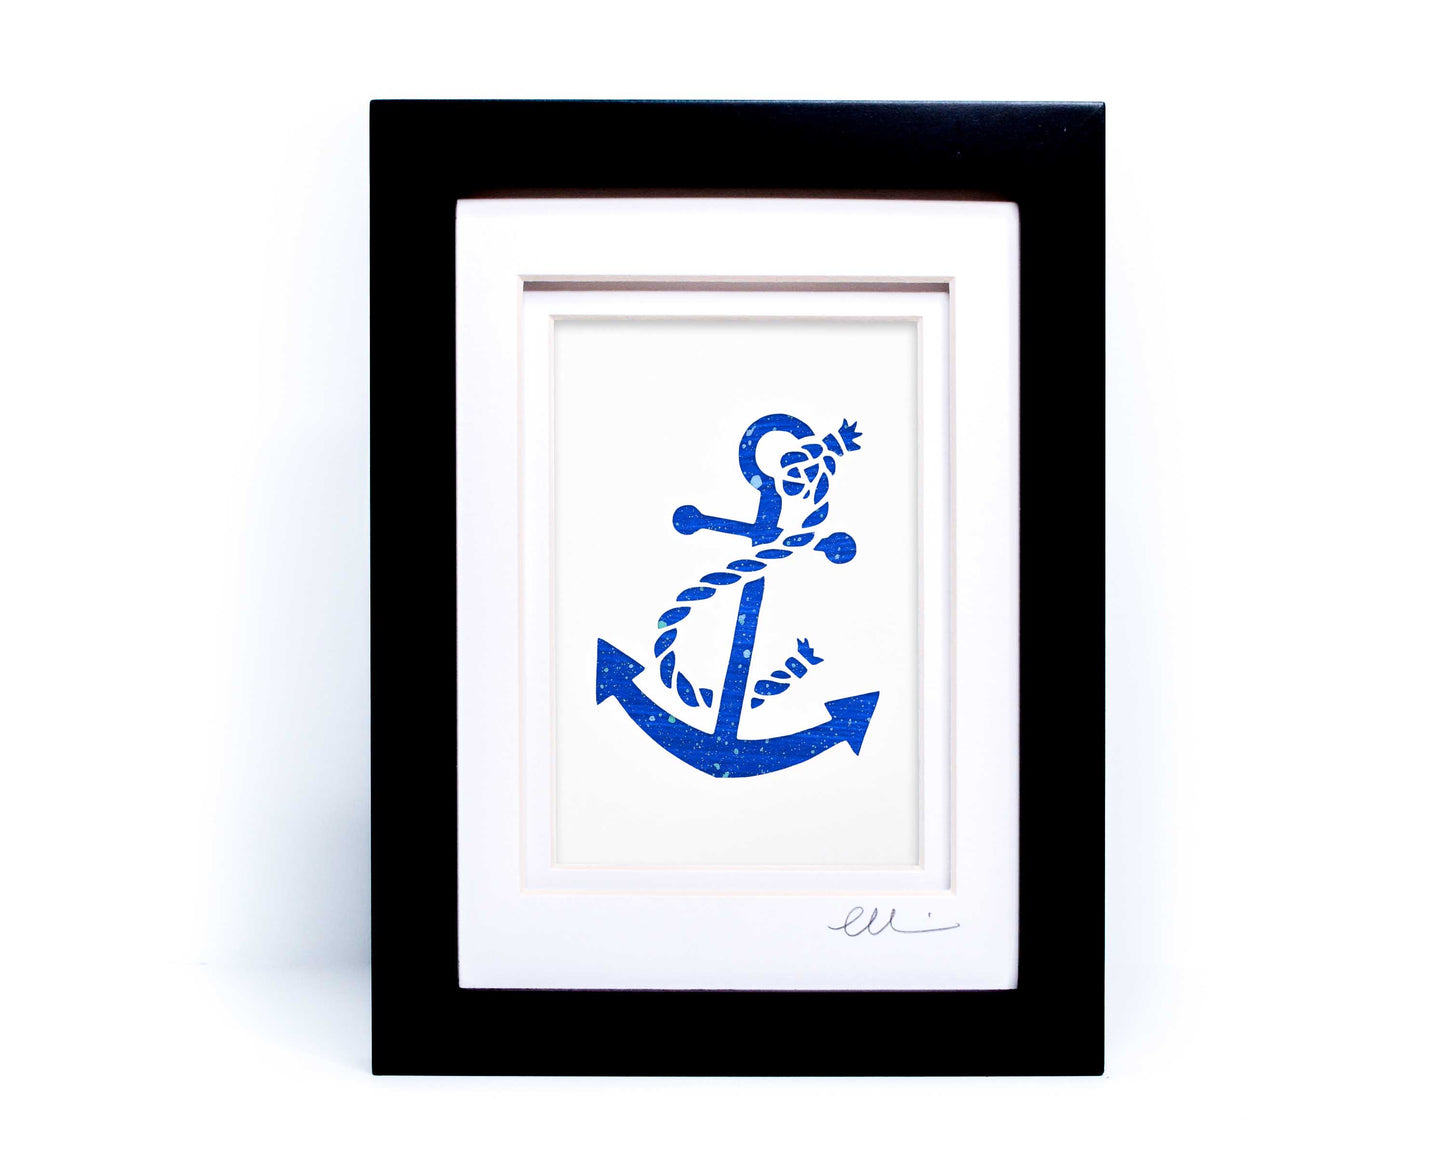 White nautical anchor twisted with rope papercut on hand painted bright blue splattered background.